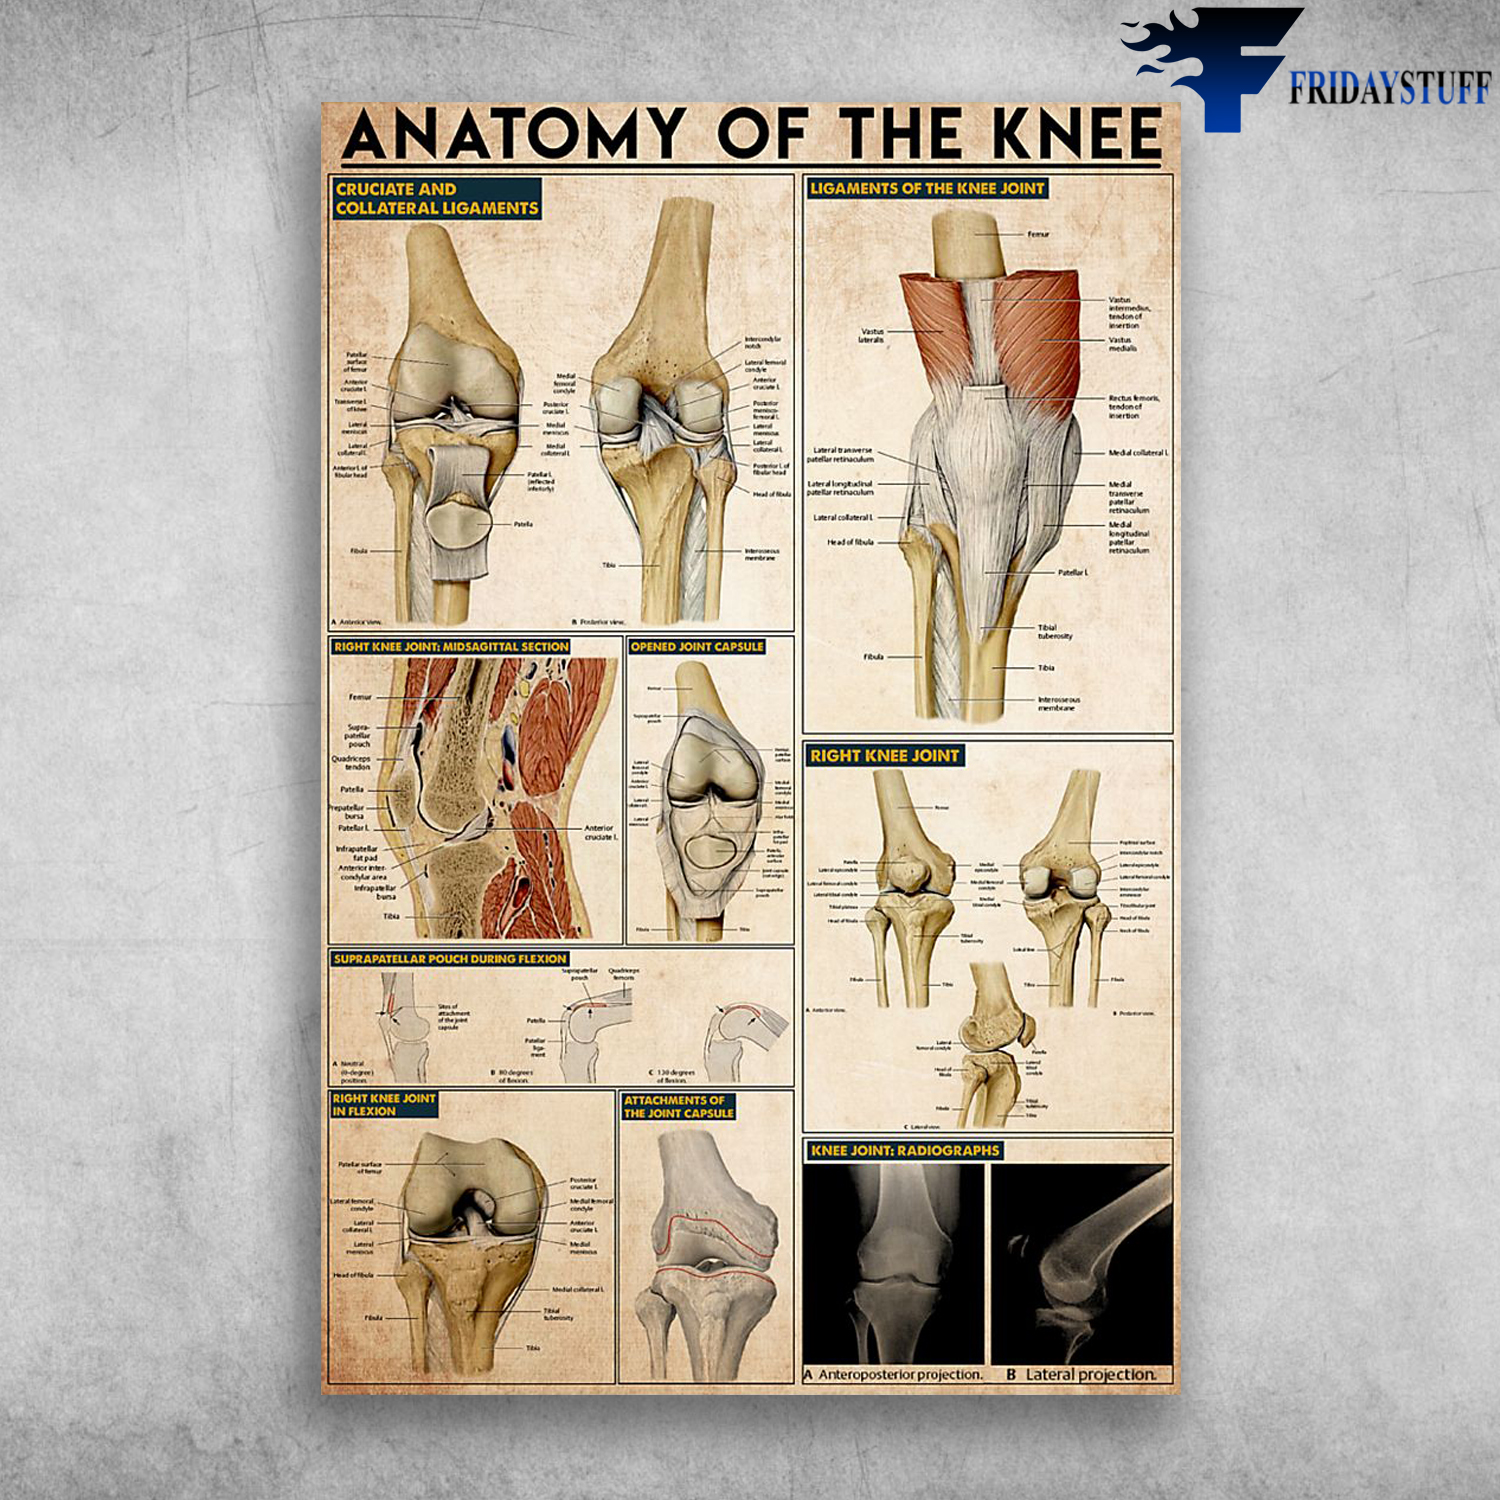 Anatomy Of The Knee Cruciate And Collateral Ligaments